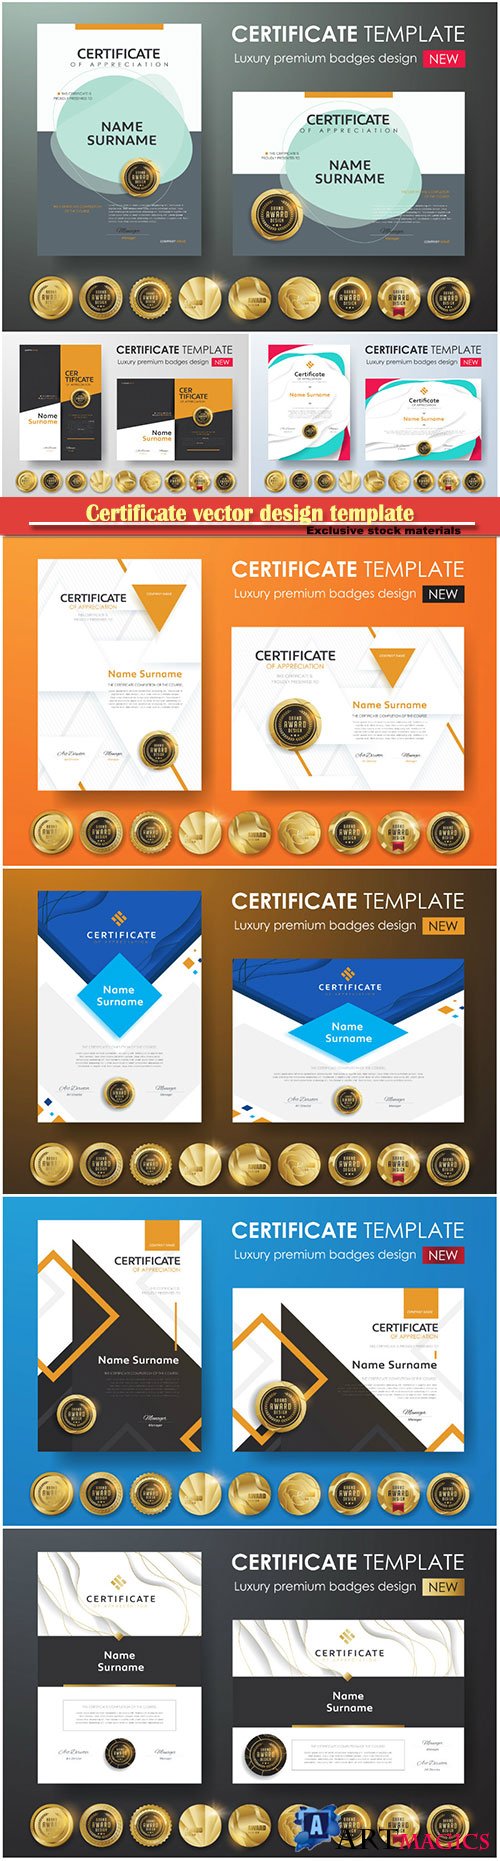 Certificate and vector diploma design template # 64